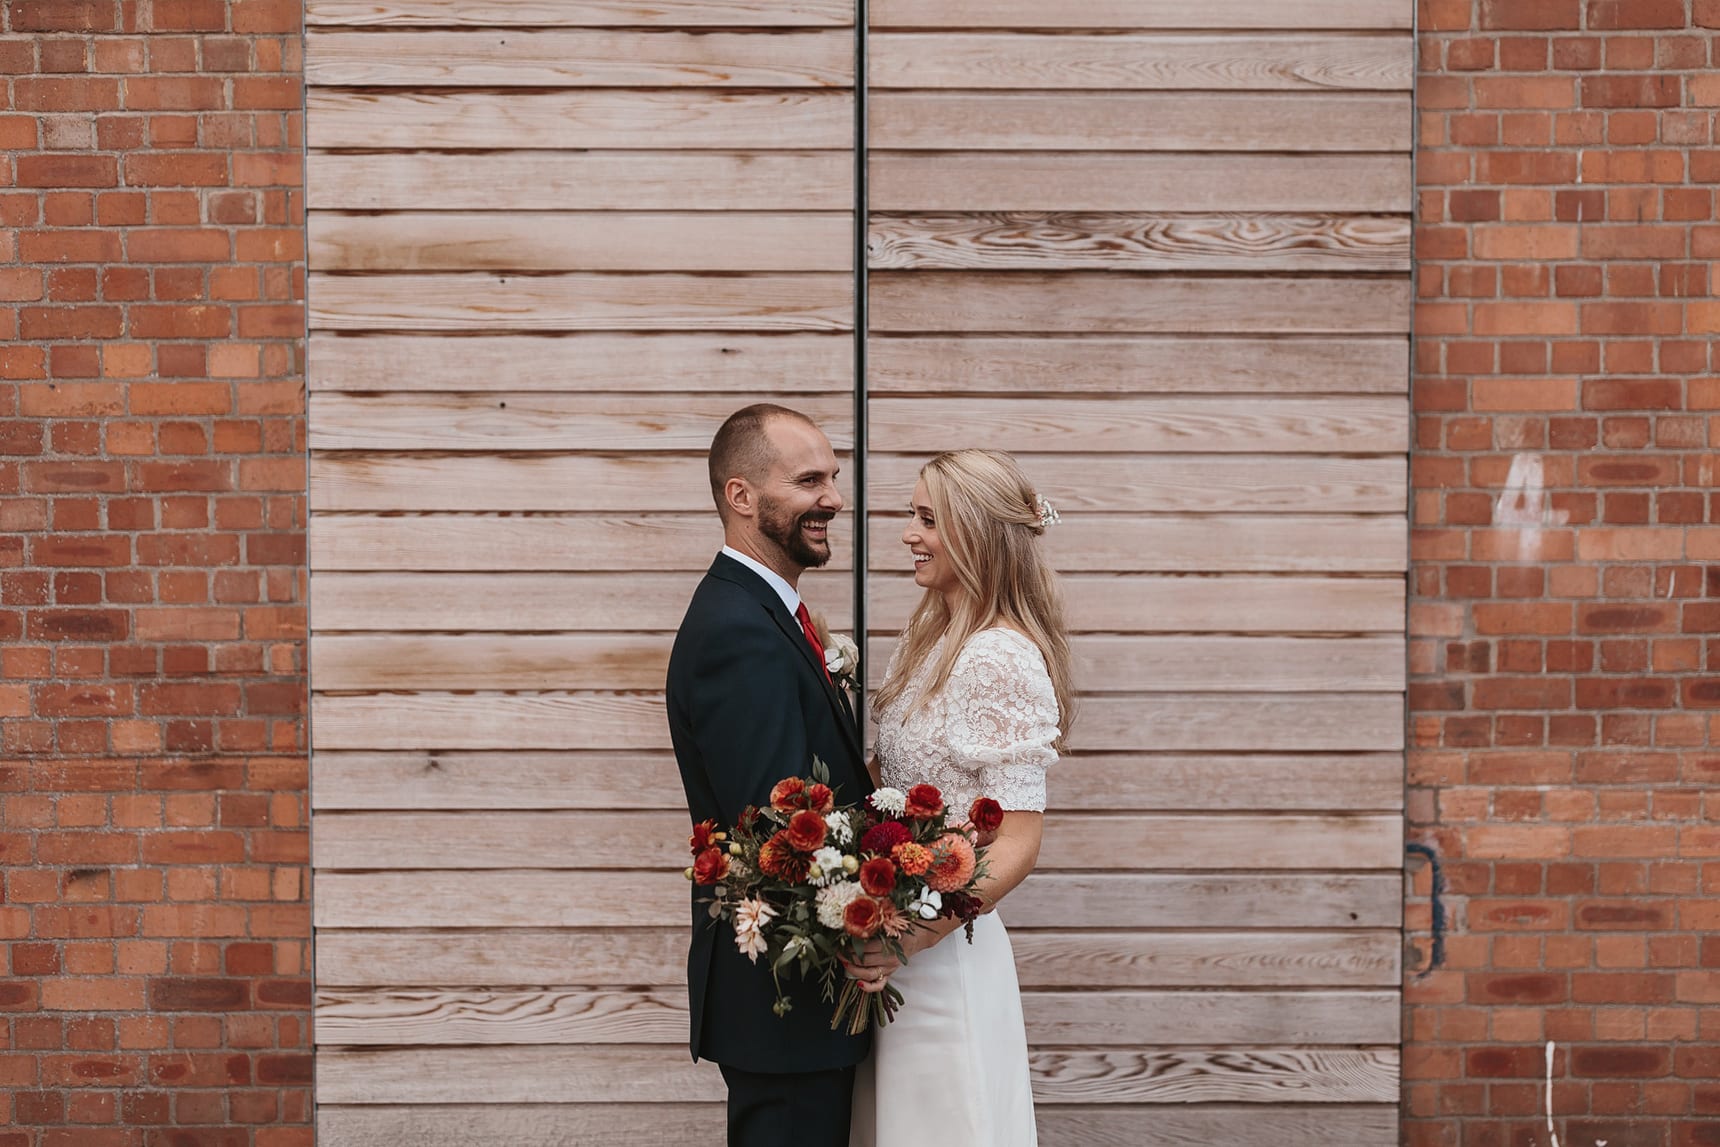 Wedding portrait of a bride and groom in front of a wooden door with bricks on the side